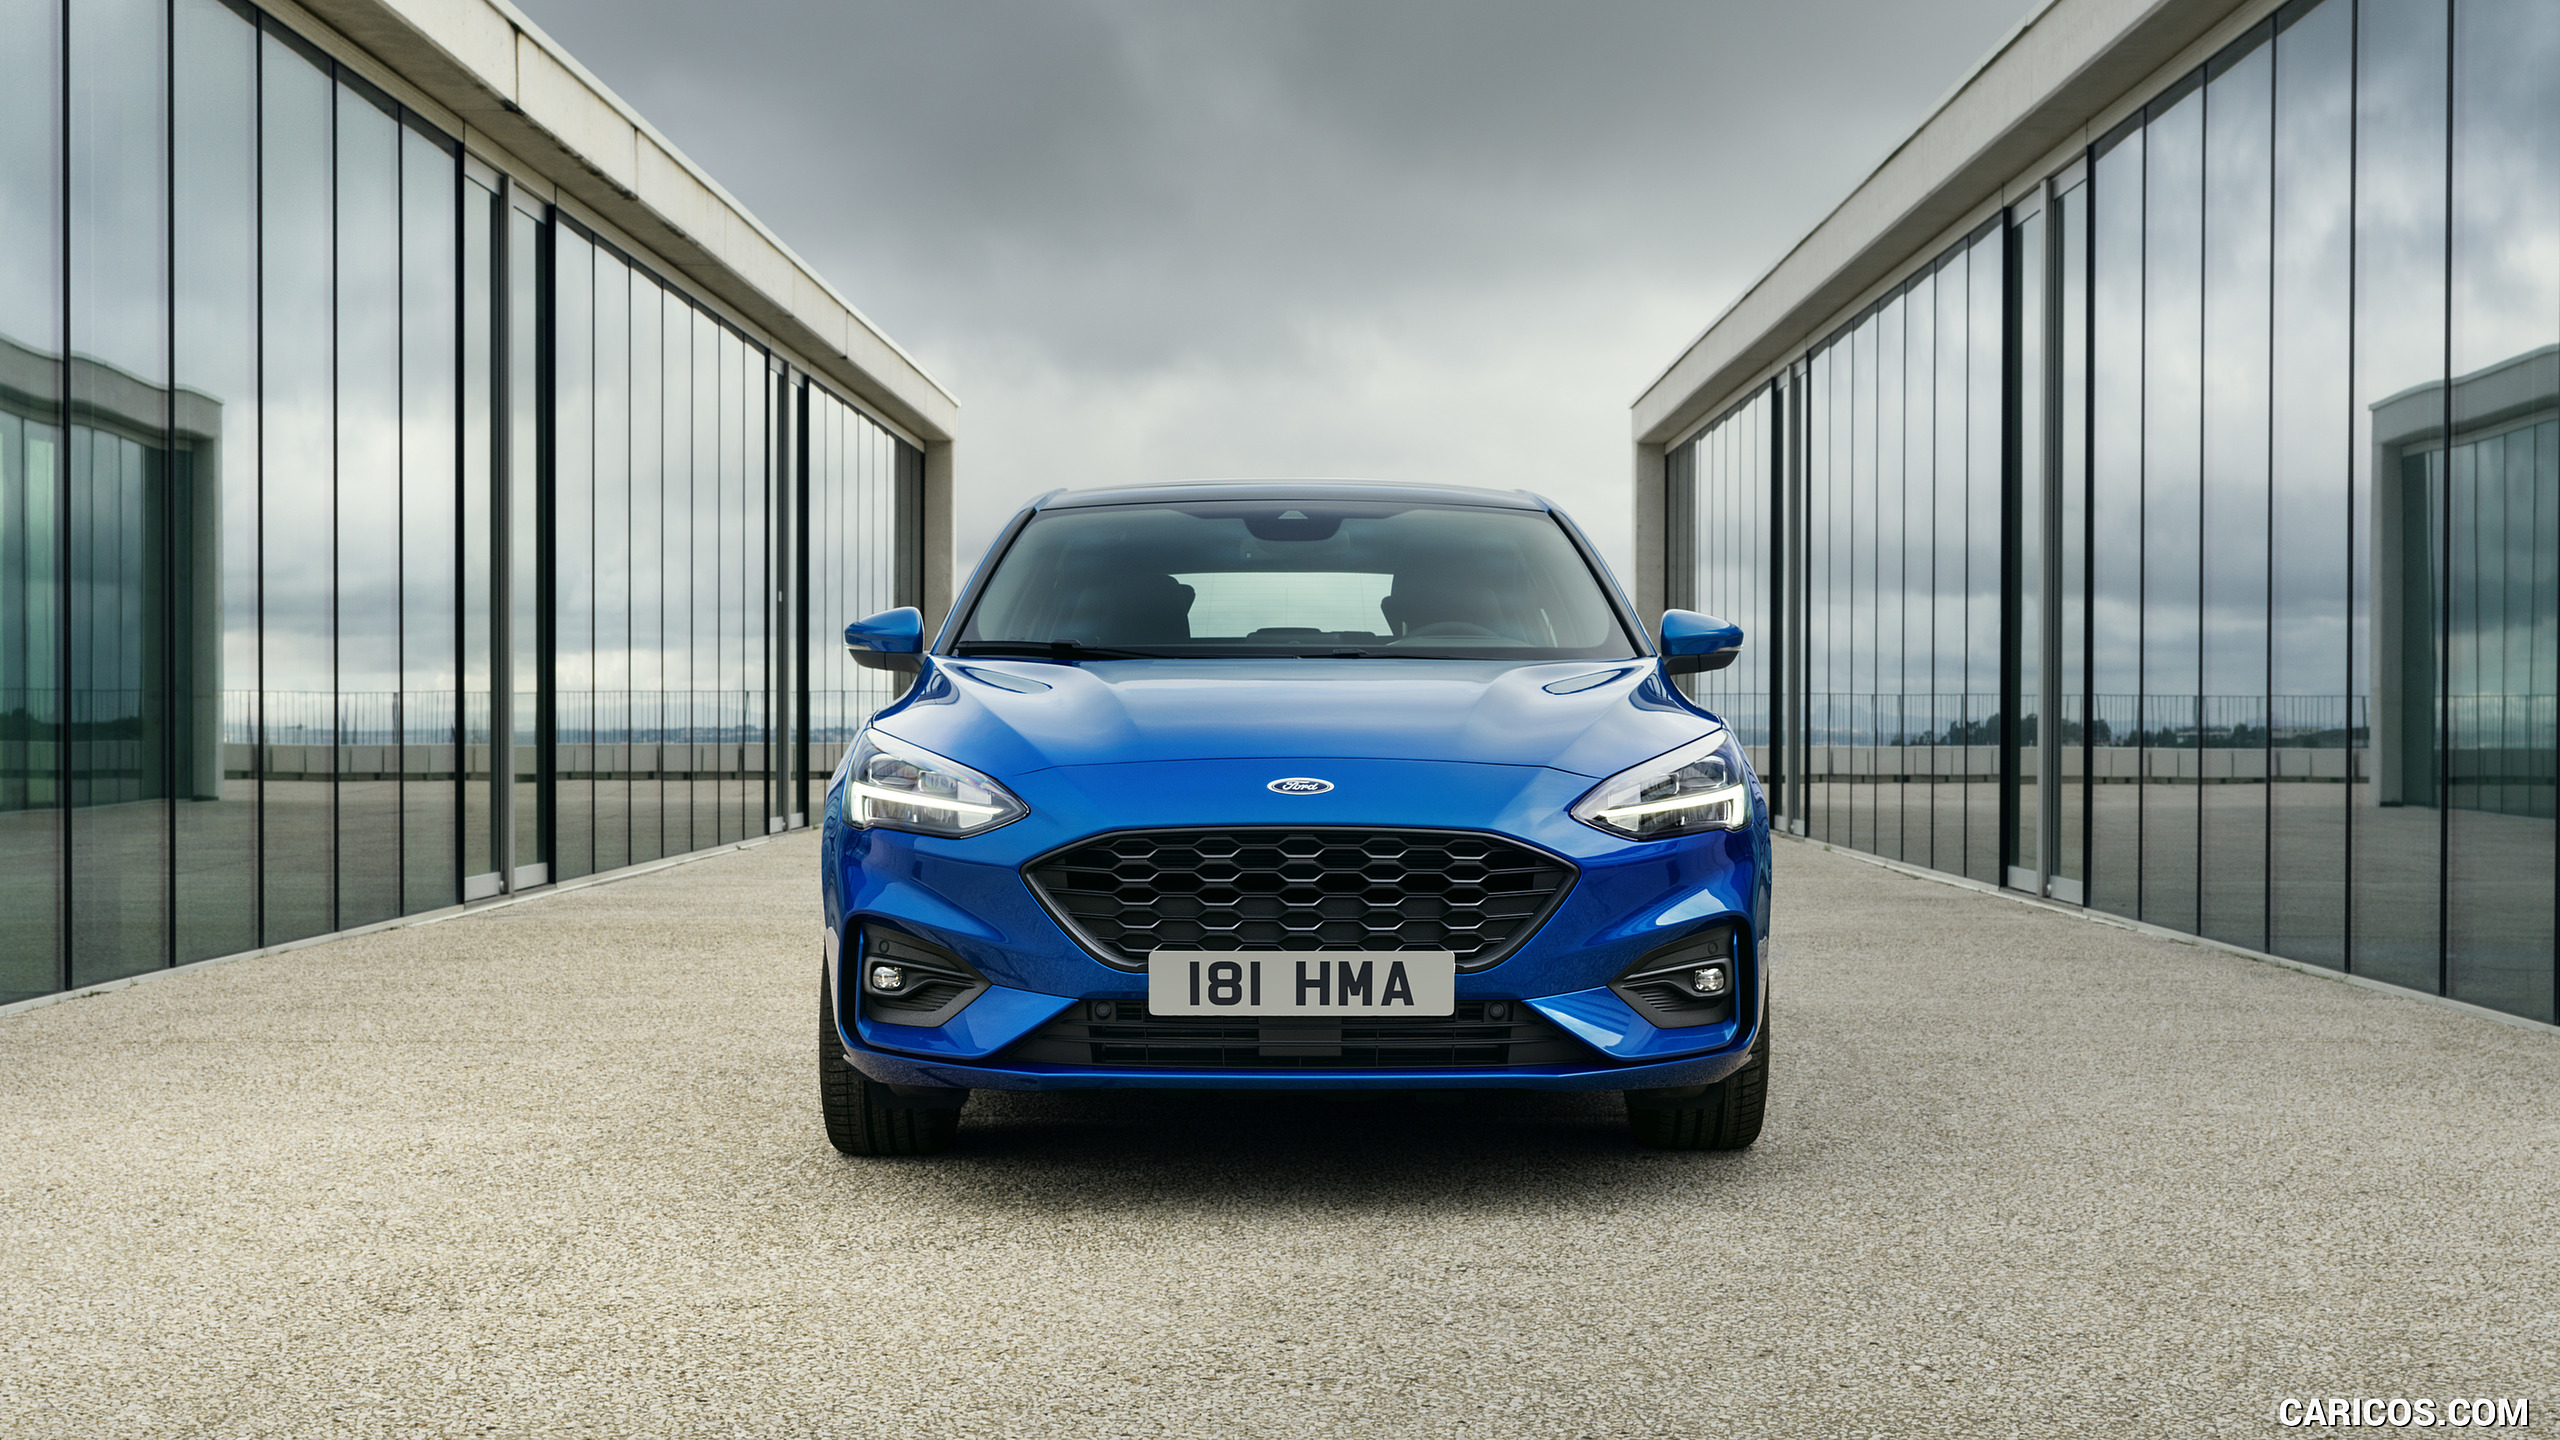 Ford Focus St 2019 Wallpapers